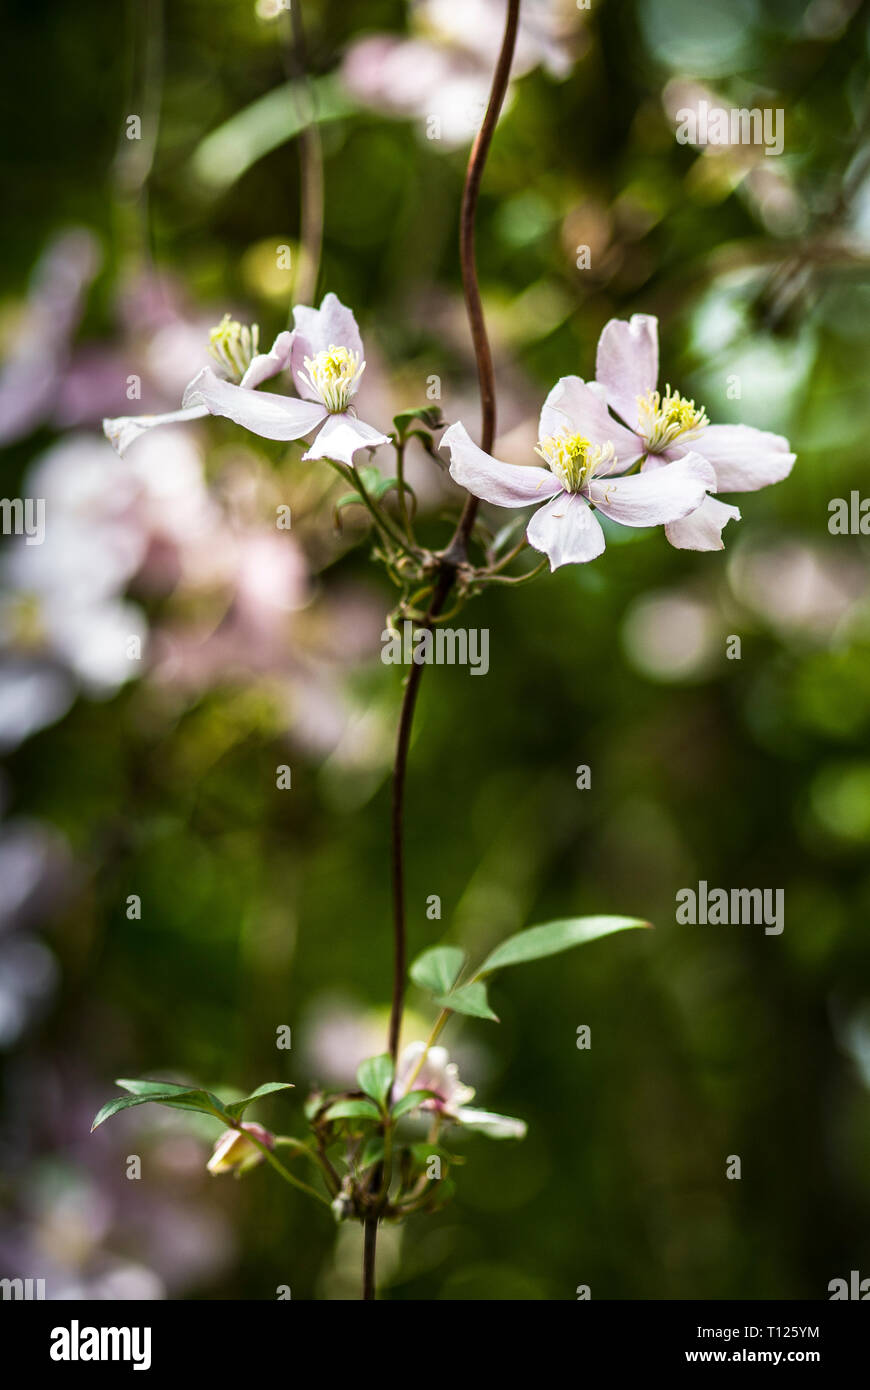 Clematis montana 'Rubens', 'pink perfection', flowering from free hanging stalk, short depth of field, blurred background Stock Photo